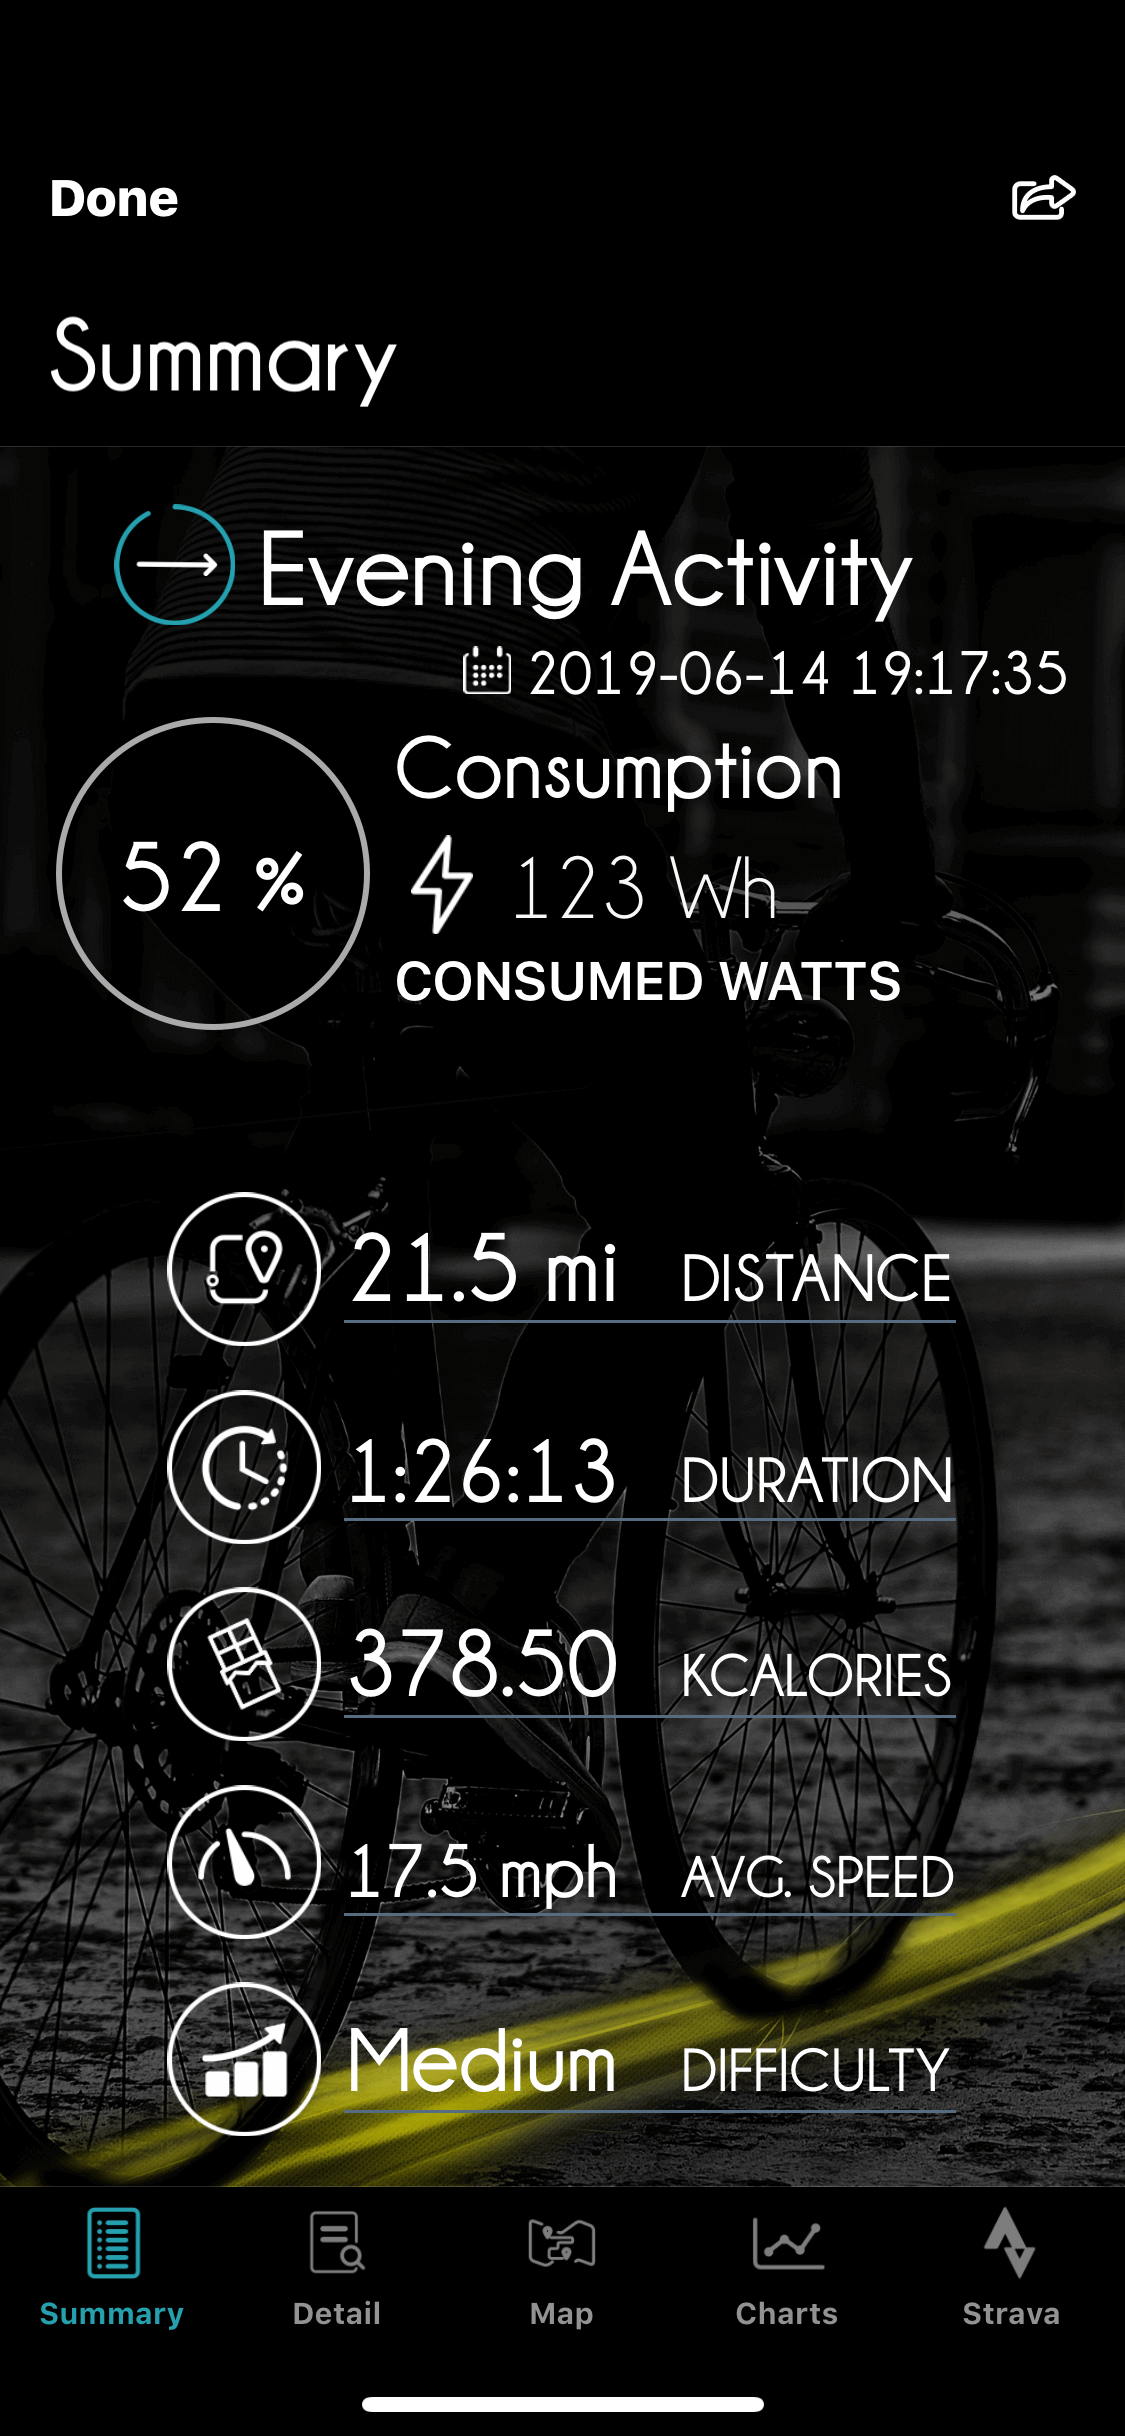 eBikemotion App Screen showing total ride power output